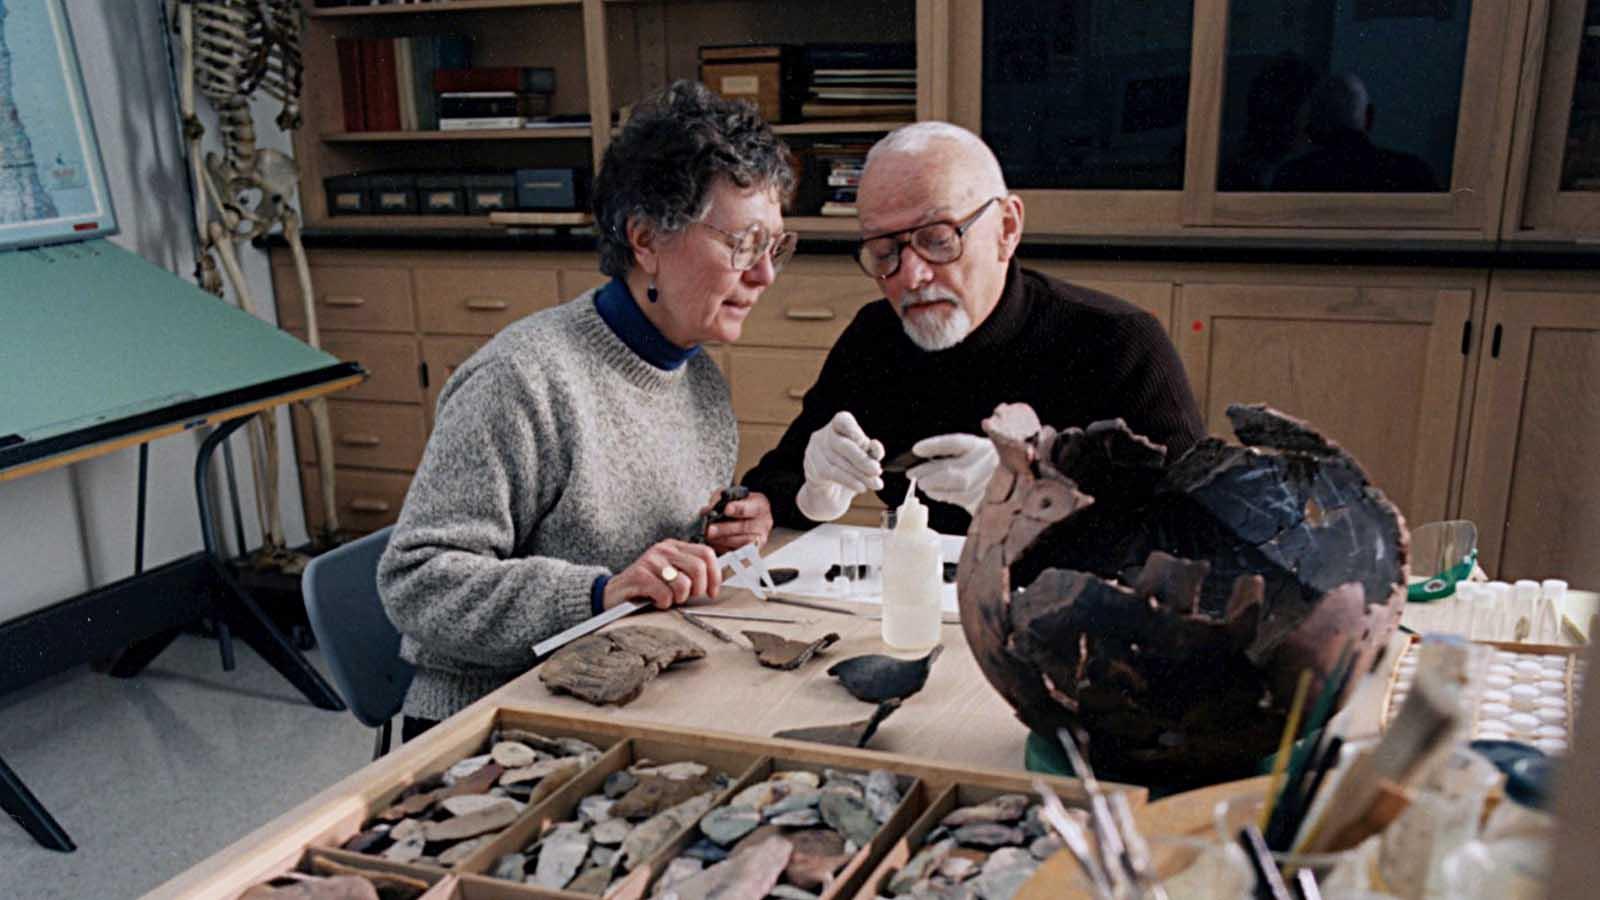 Ron and Carol Mason engaged in study of anthropological specimen